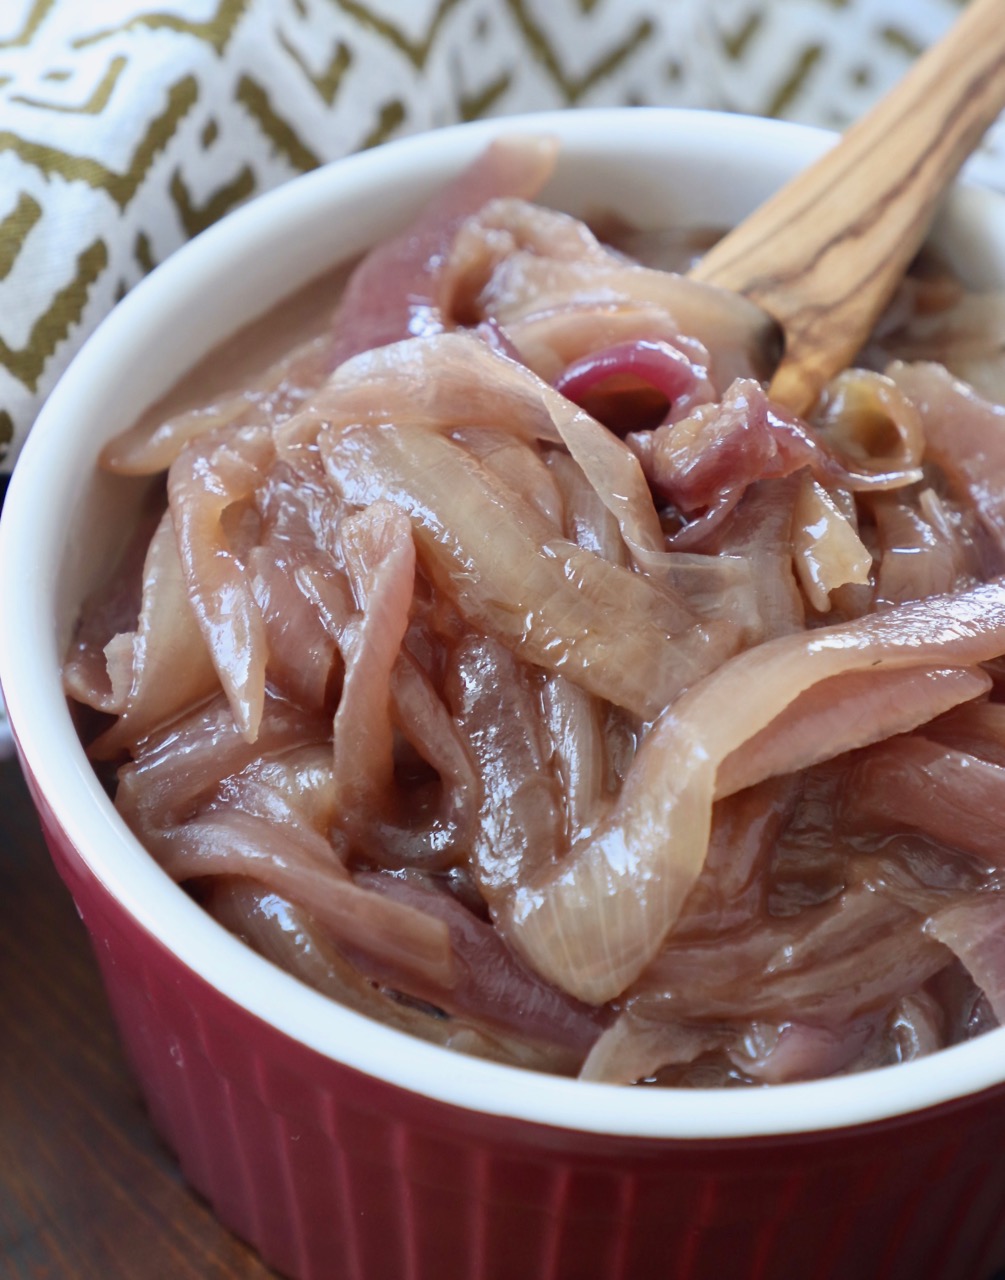 caramelized onions in red bowl with wooden fork